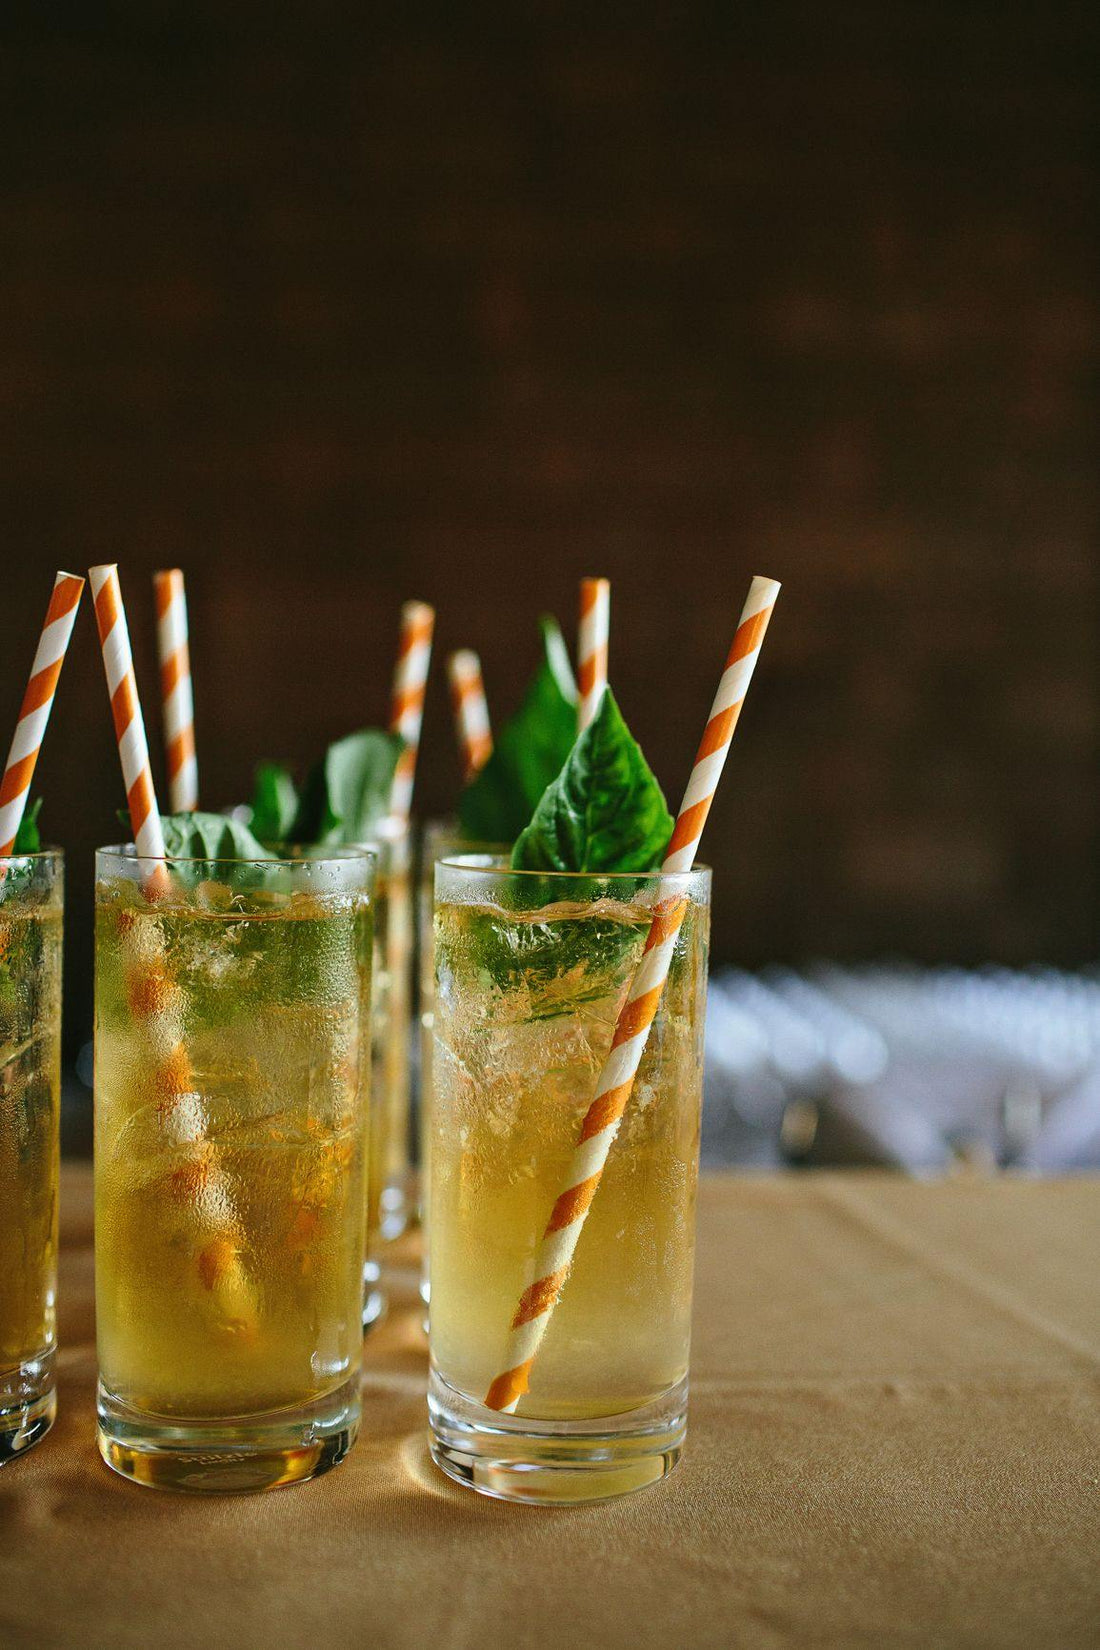 Why Are Paper Straws Not That Popular Anymore? - StrawbyStraw